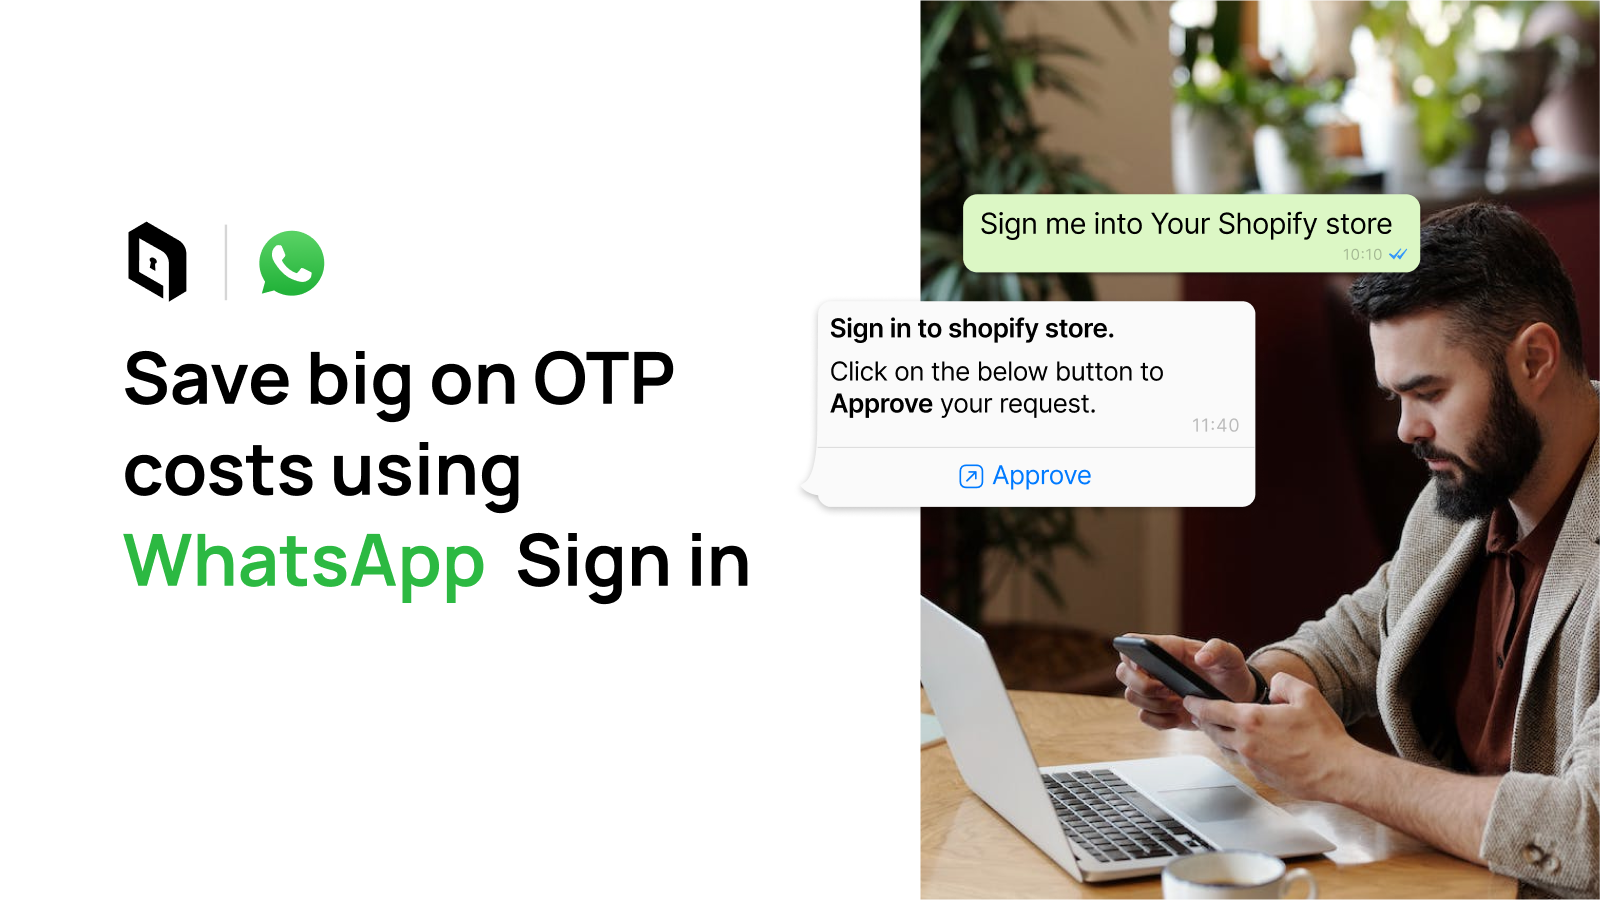 Save big on your OTP costs with OTPLESS WhatsApp Sign In